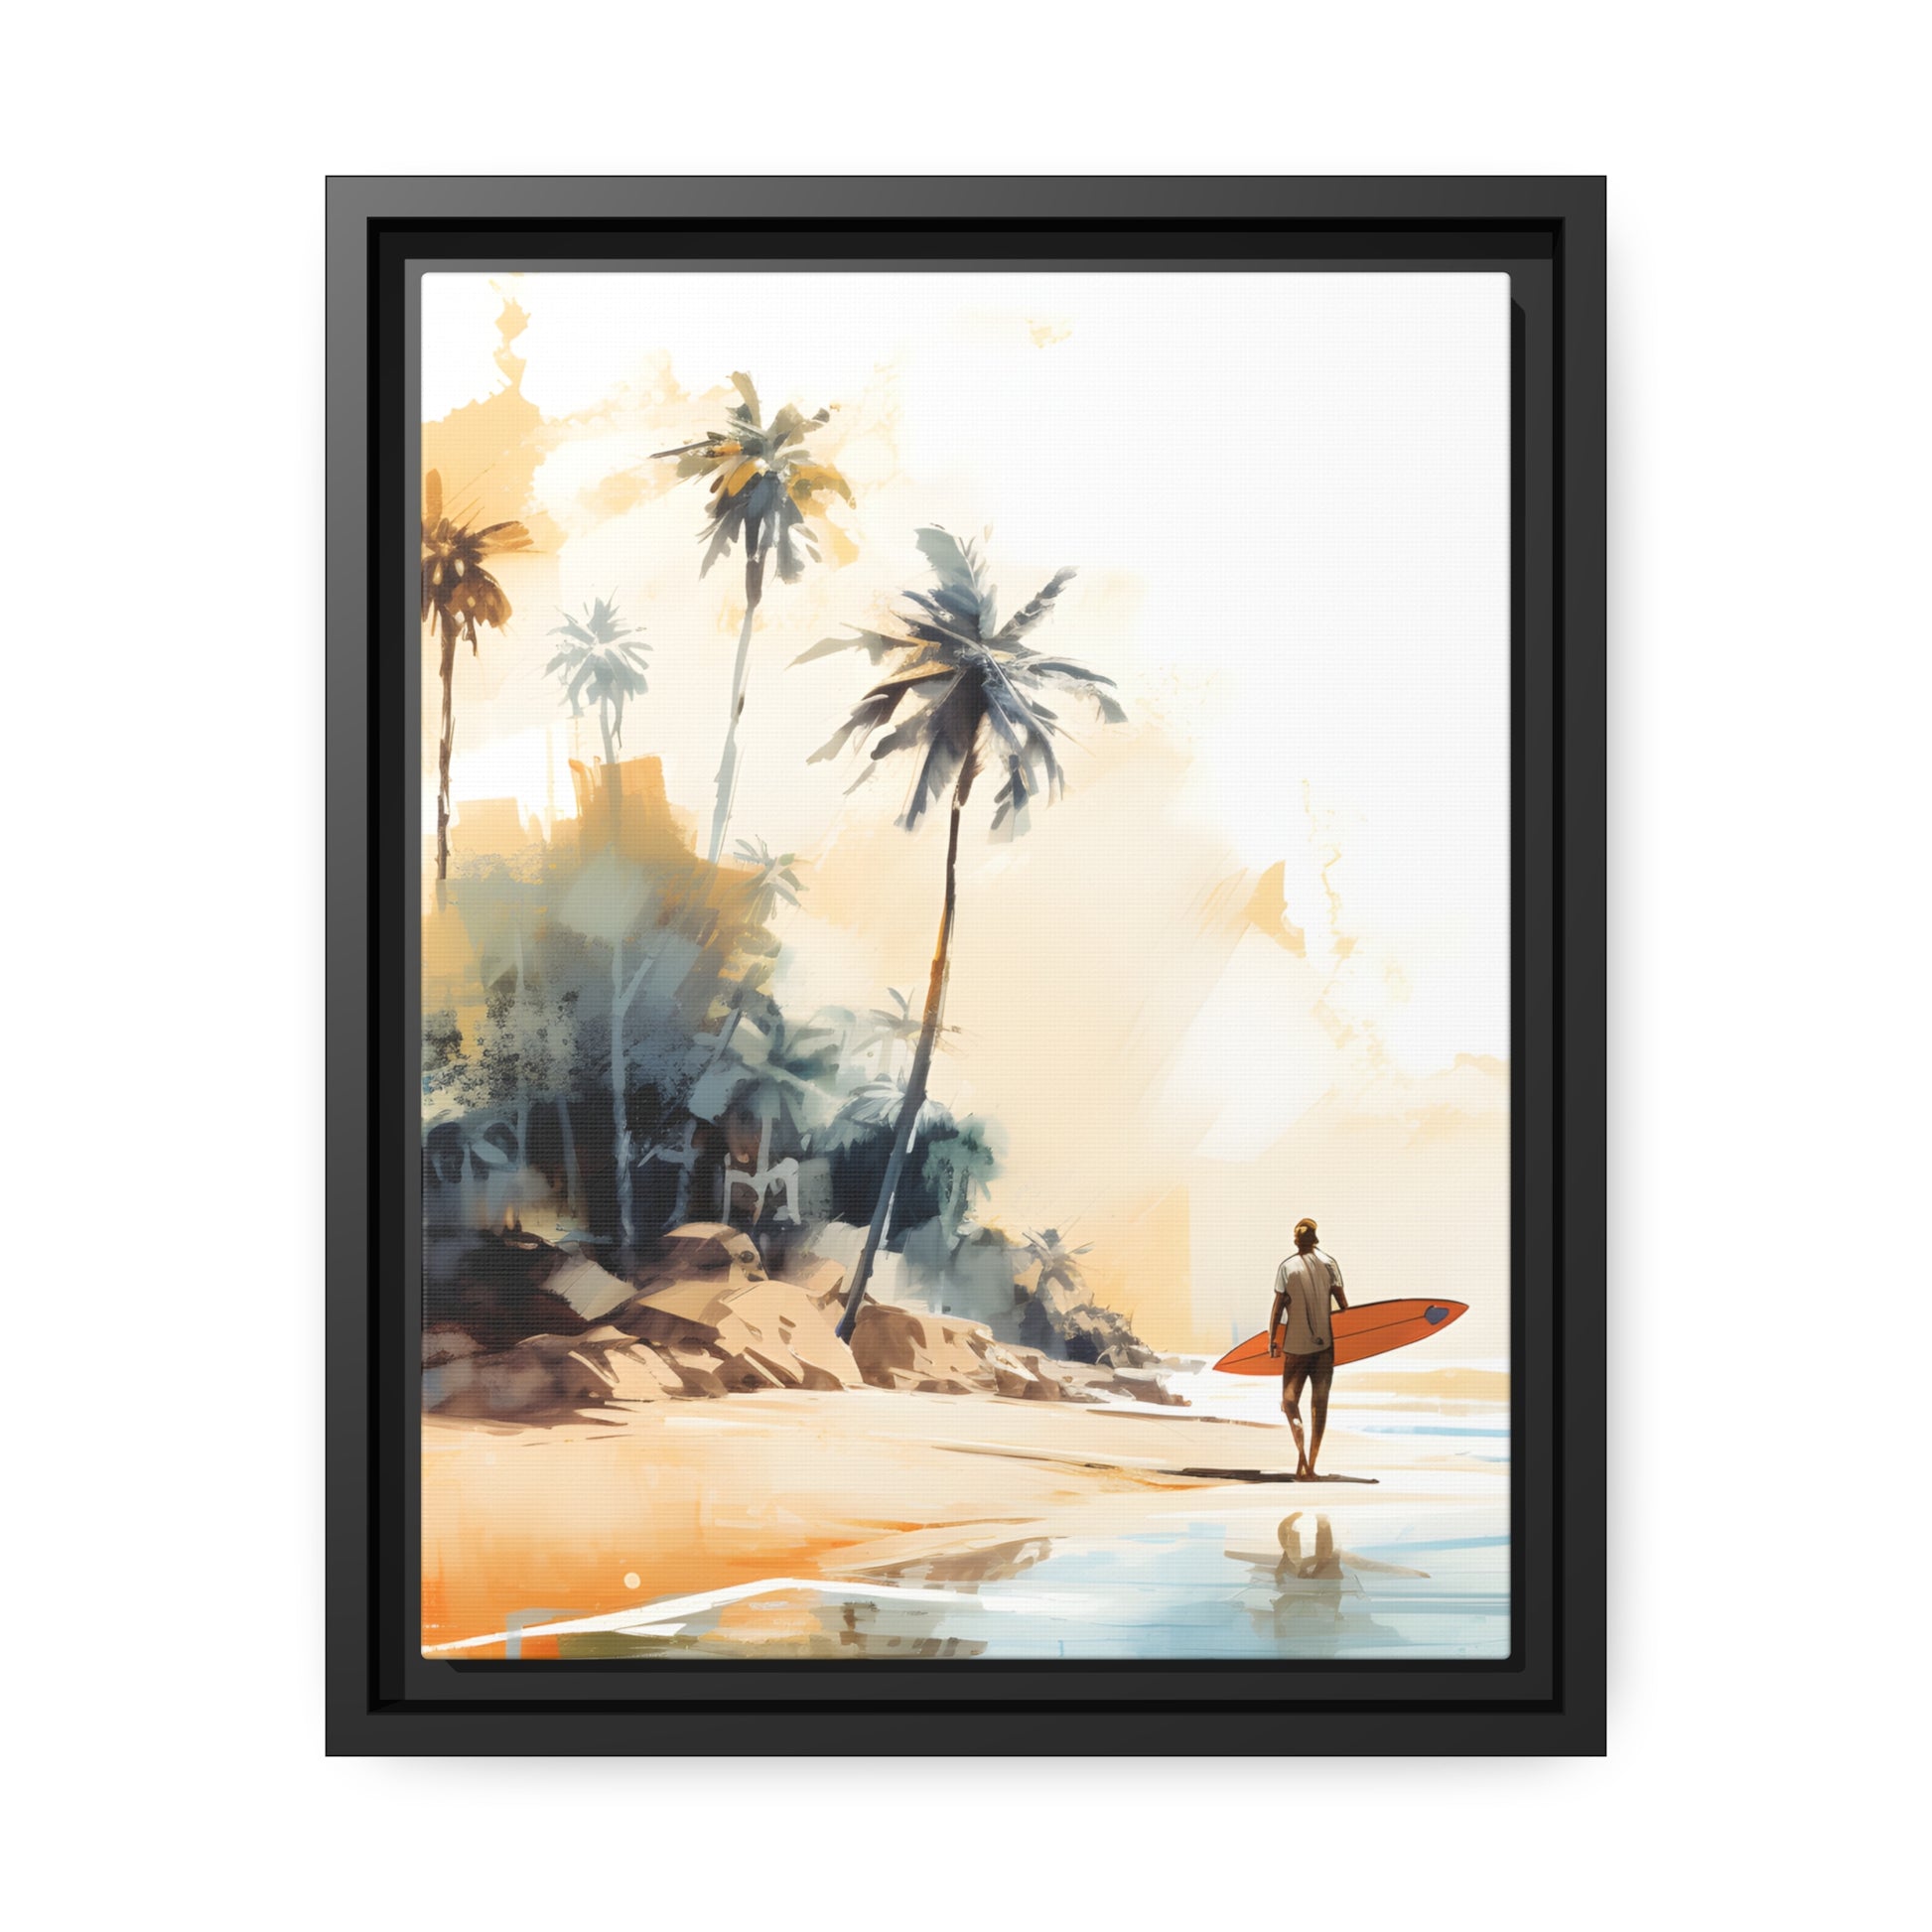 Framed Canvas Artwork Beach Ocean Surfing Art Surfer Walking Up The Beach Holding Surfboard Palm Trees Sets The Tone Floating Frame Canvas Artwork